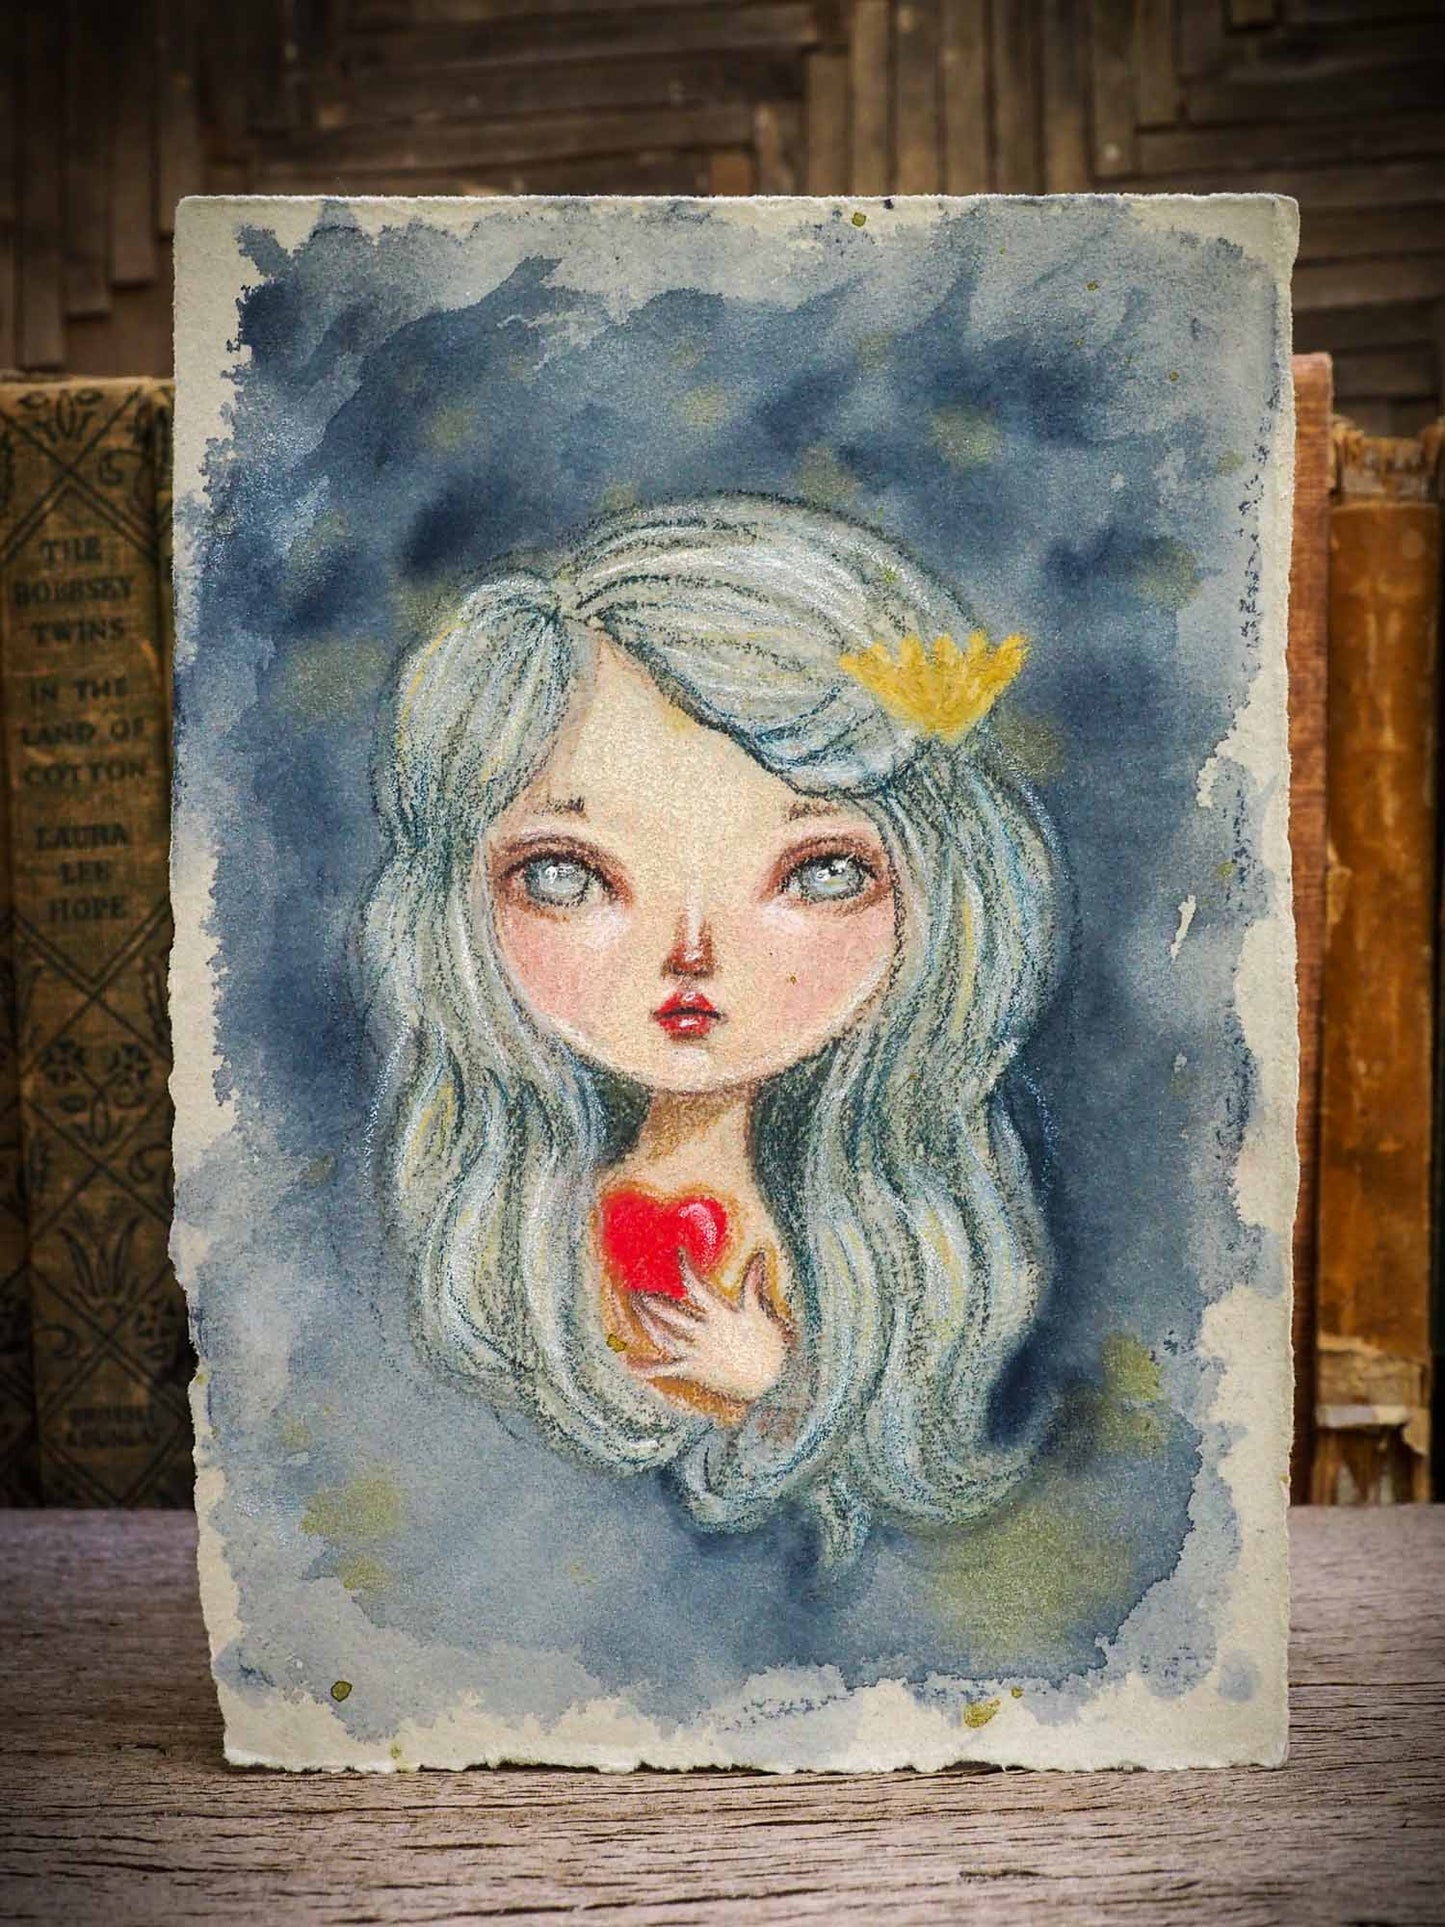 Original Mermaid color pencil and watercolor illustration on hand made paper by Danita Art. A beautiful drawing in colored pencil features fantasy art mermaid and siren with a red heart in her hands by Danita Art.